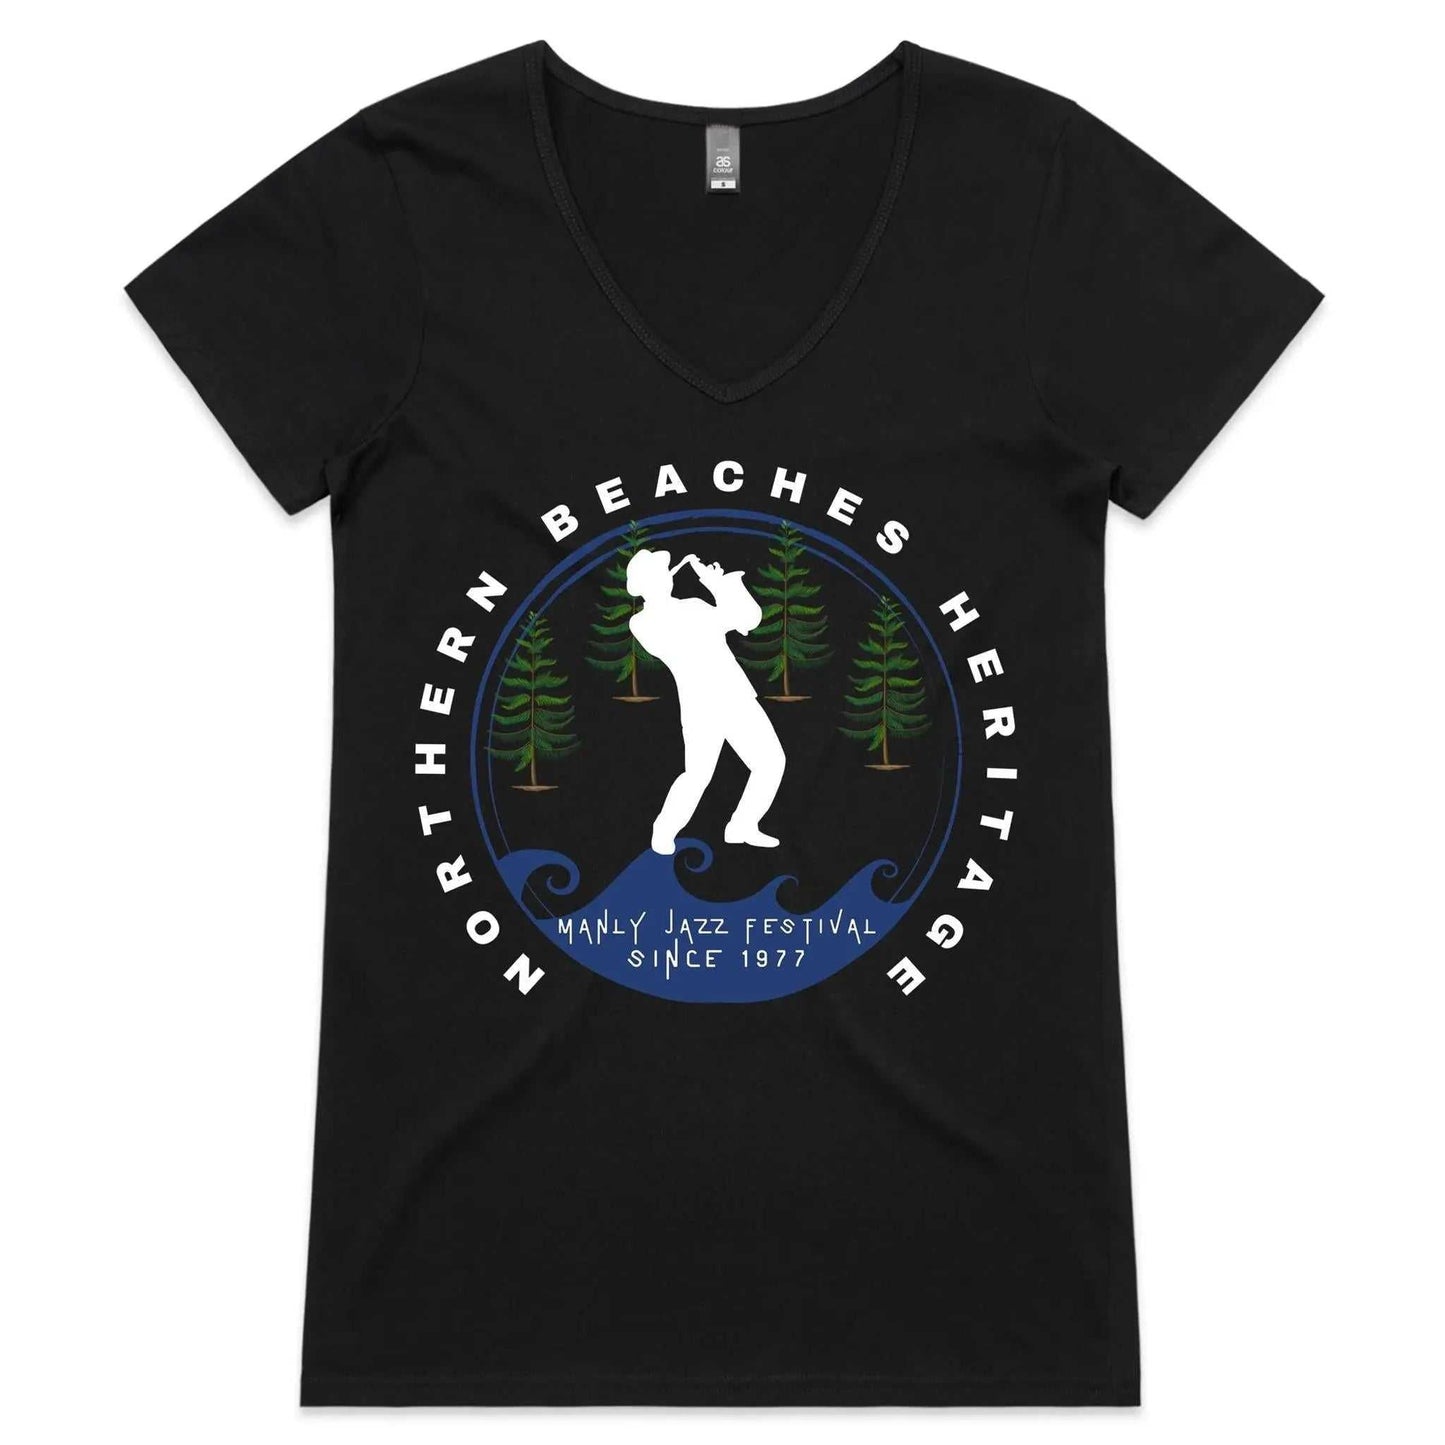 Women´s V-Neck T-Shirt digital print logo on front Northern Beaches Manly Jazz since 1977